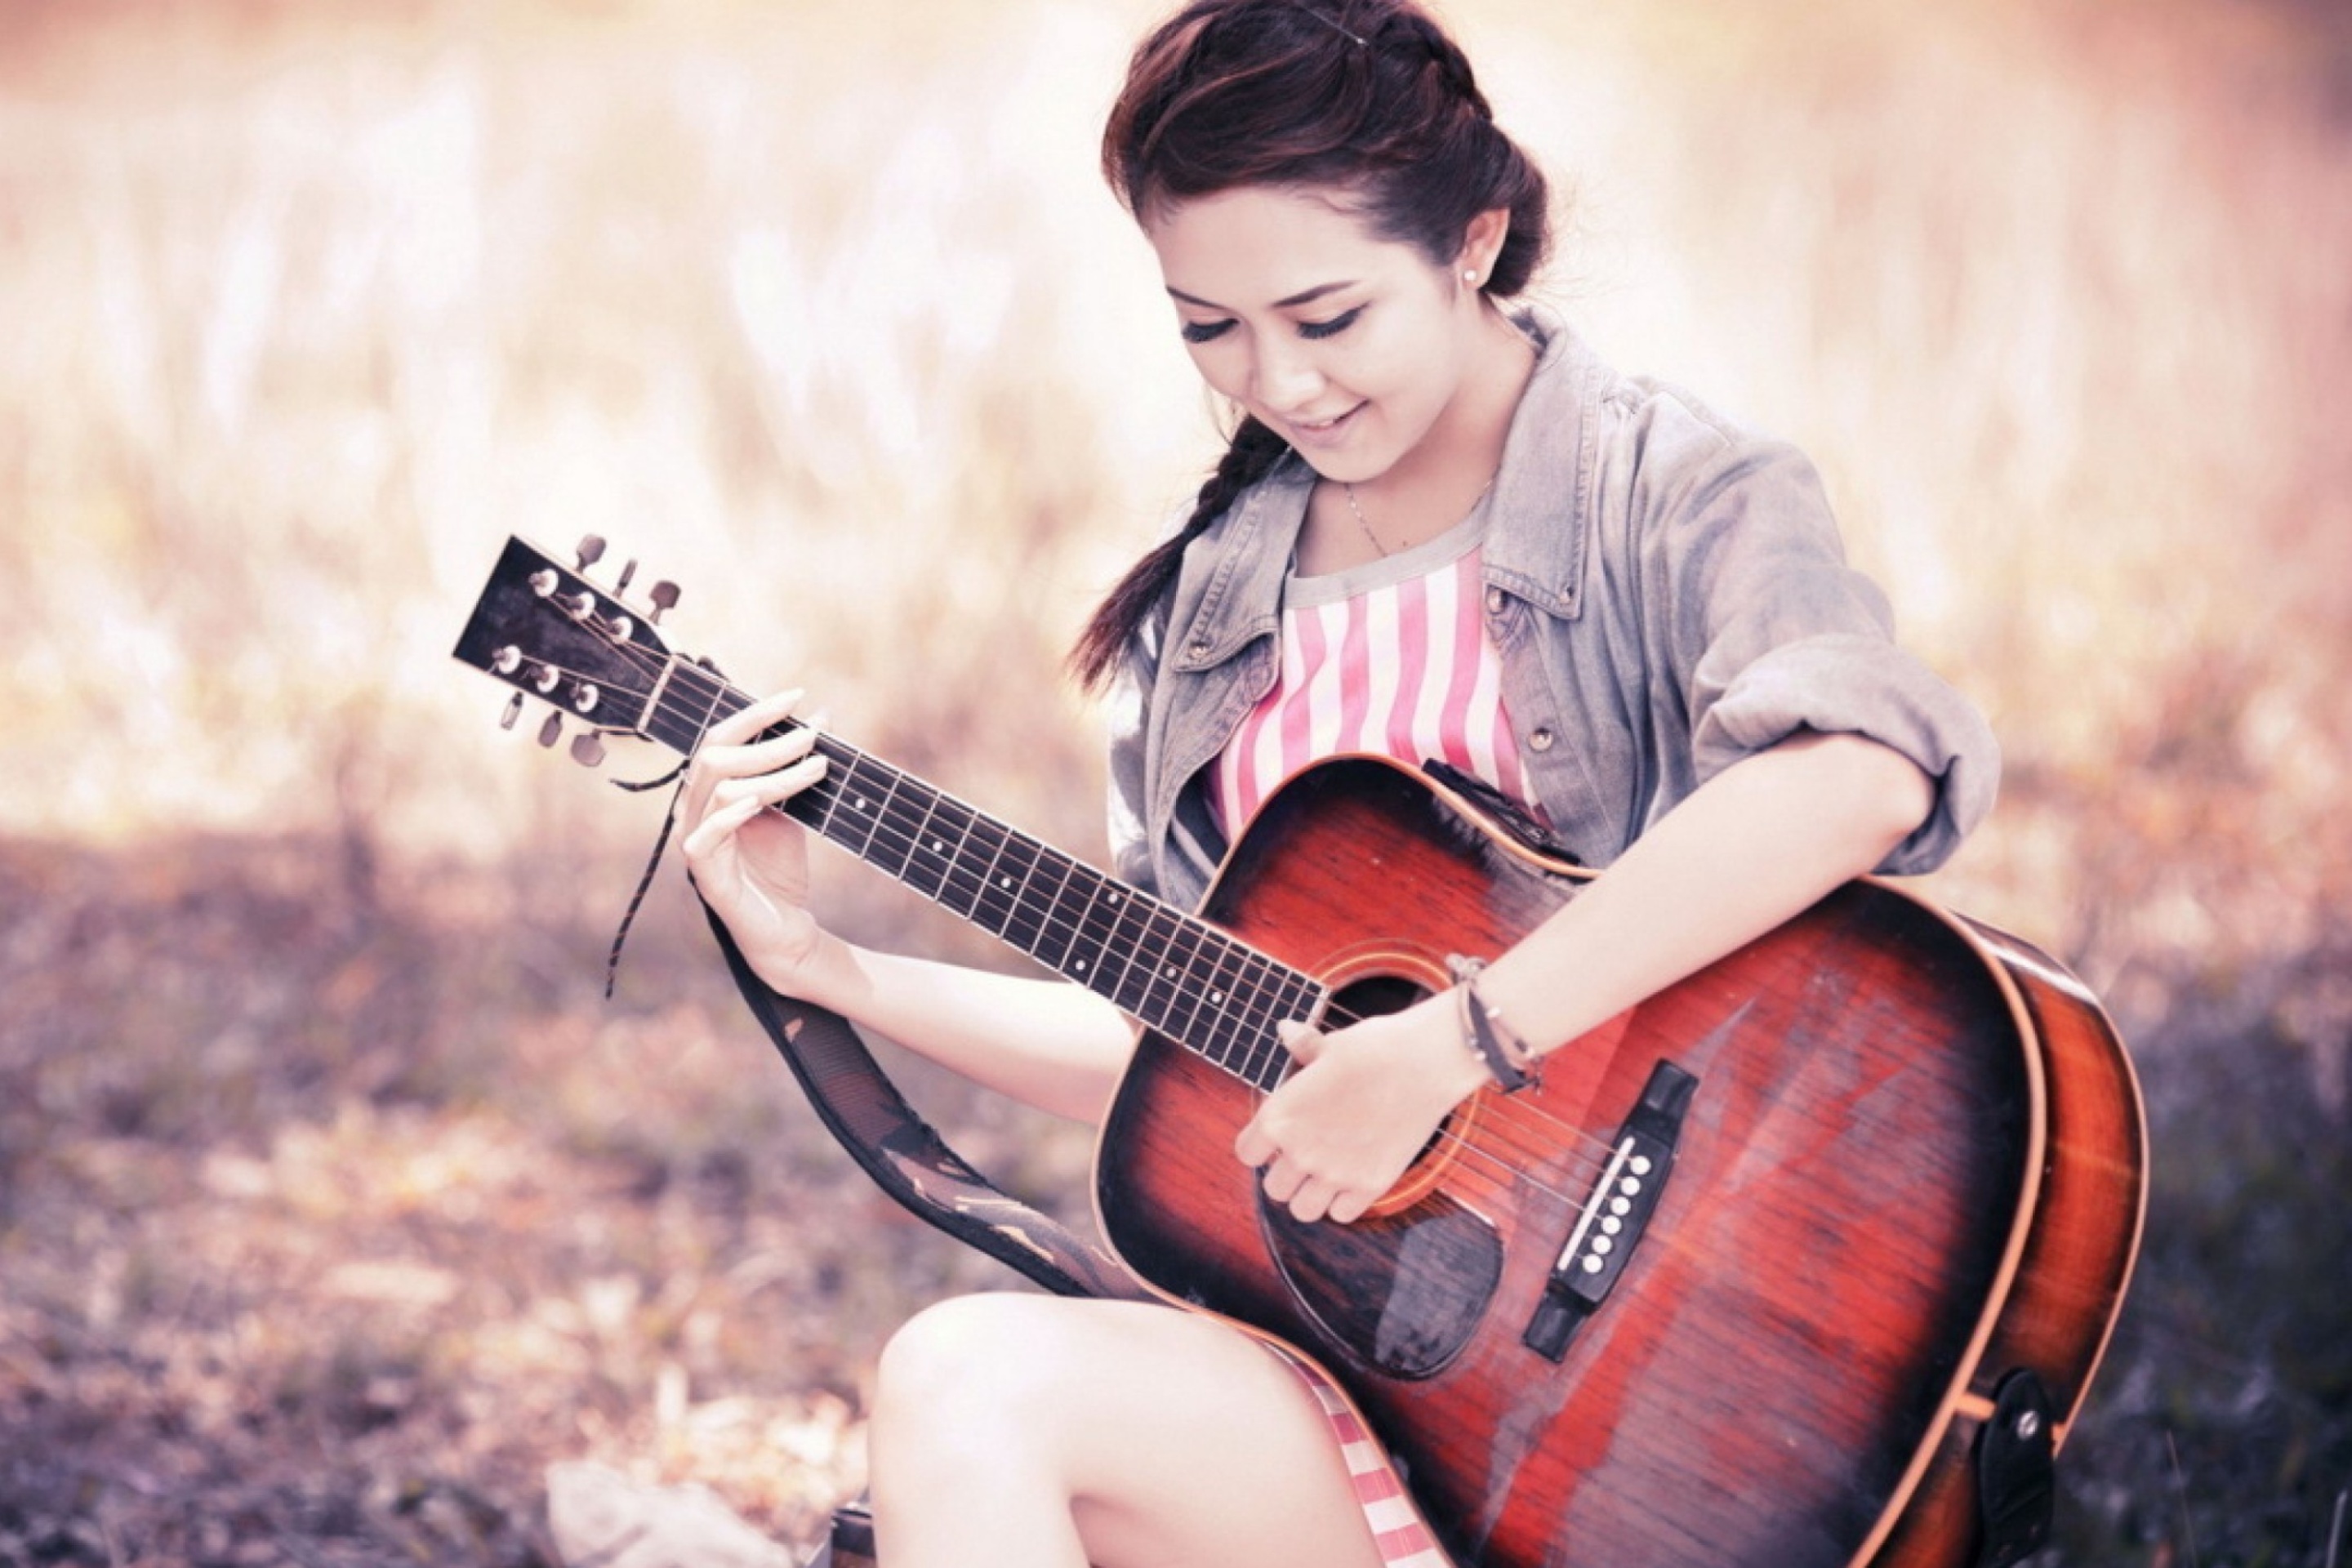 Chinese girl with guitar wallpaper 2880x1920